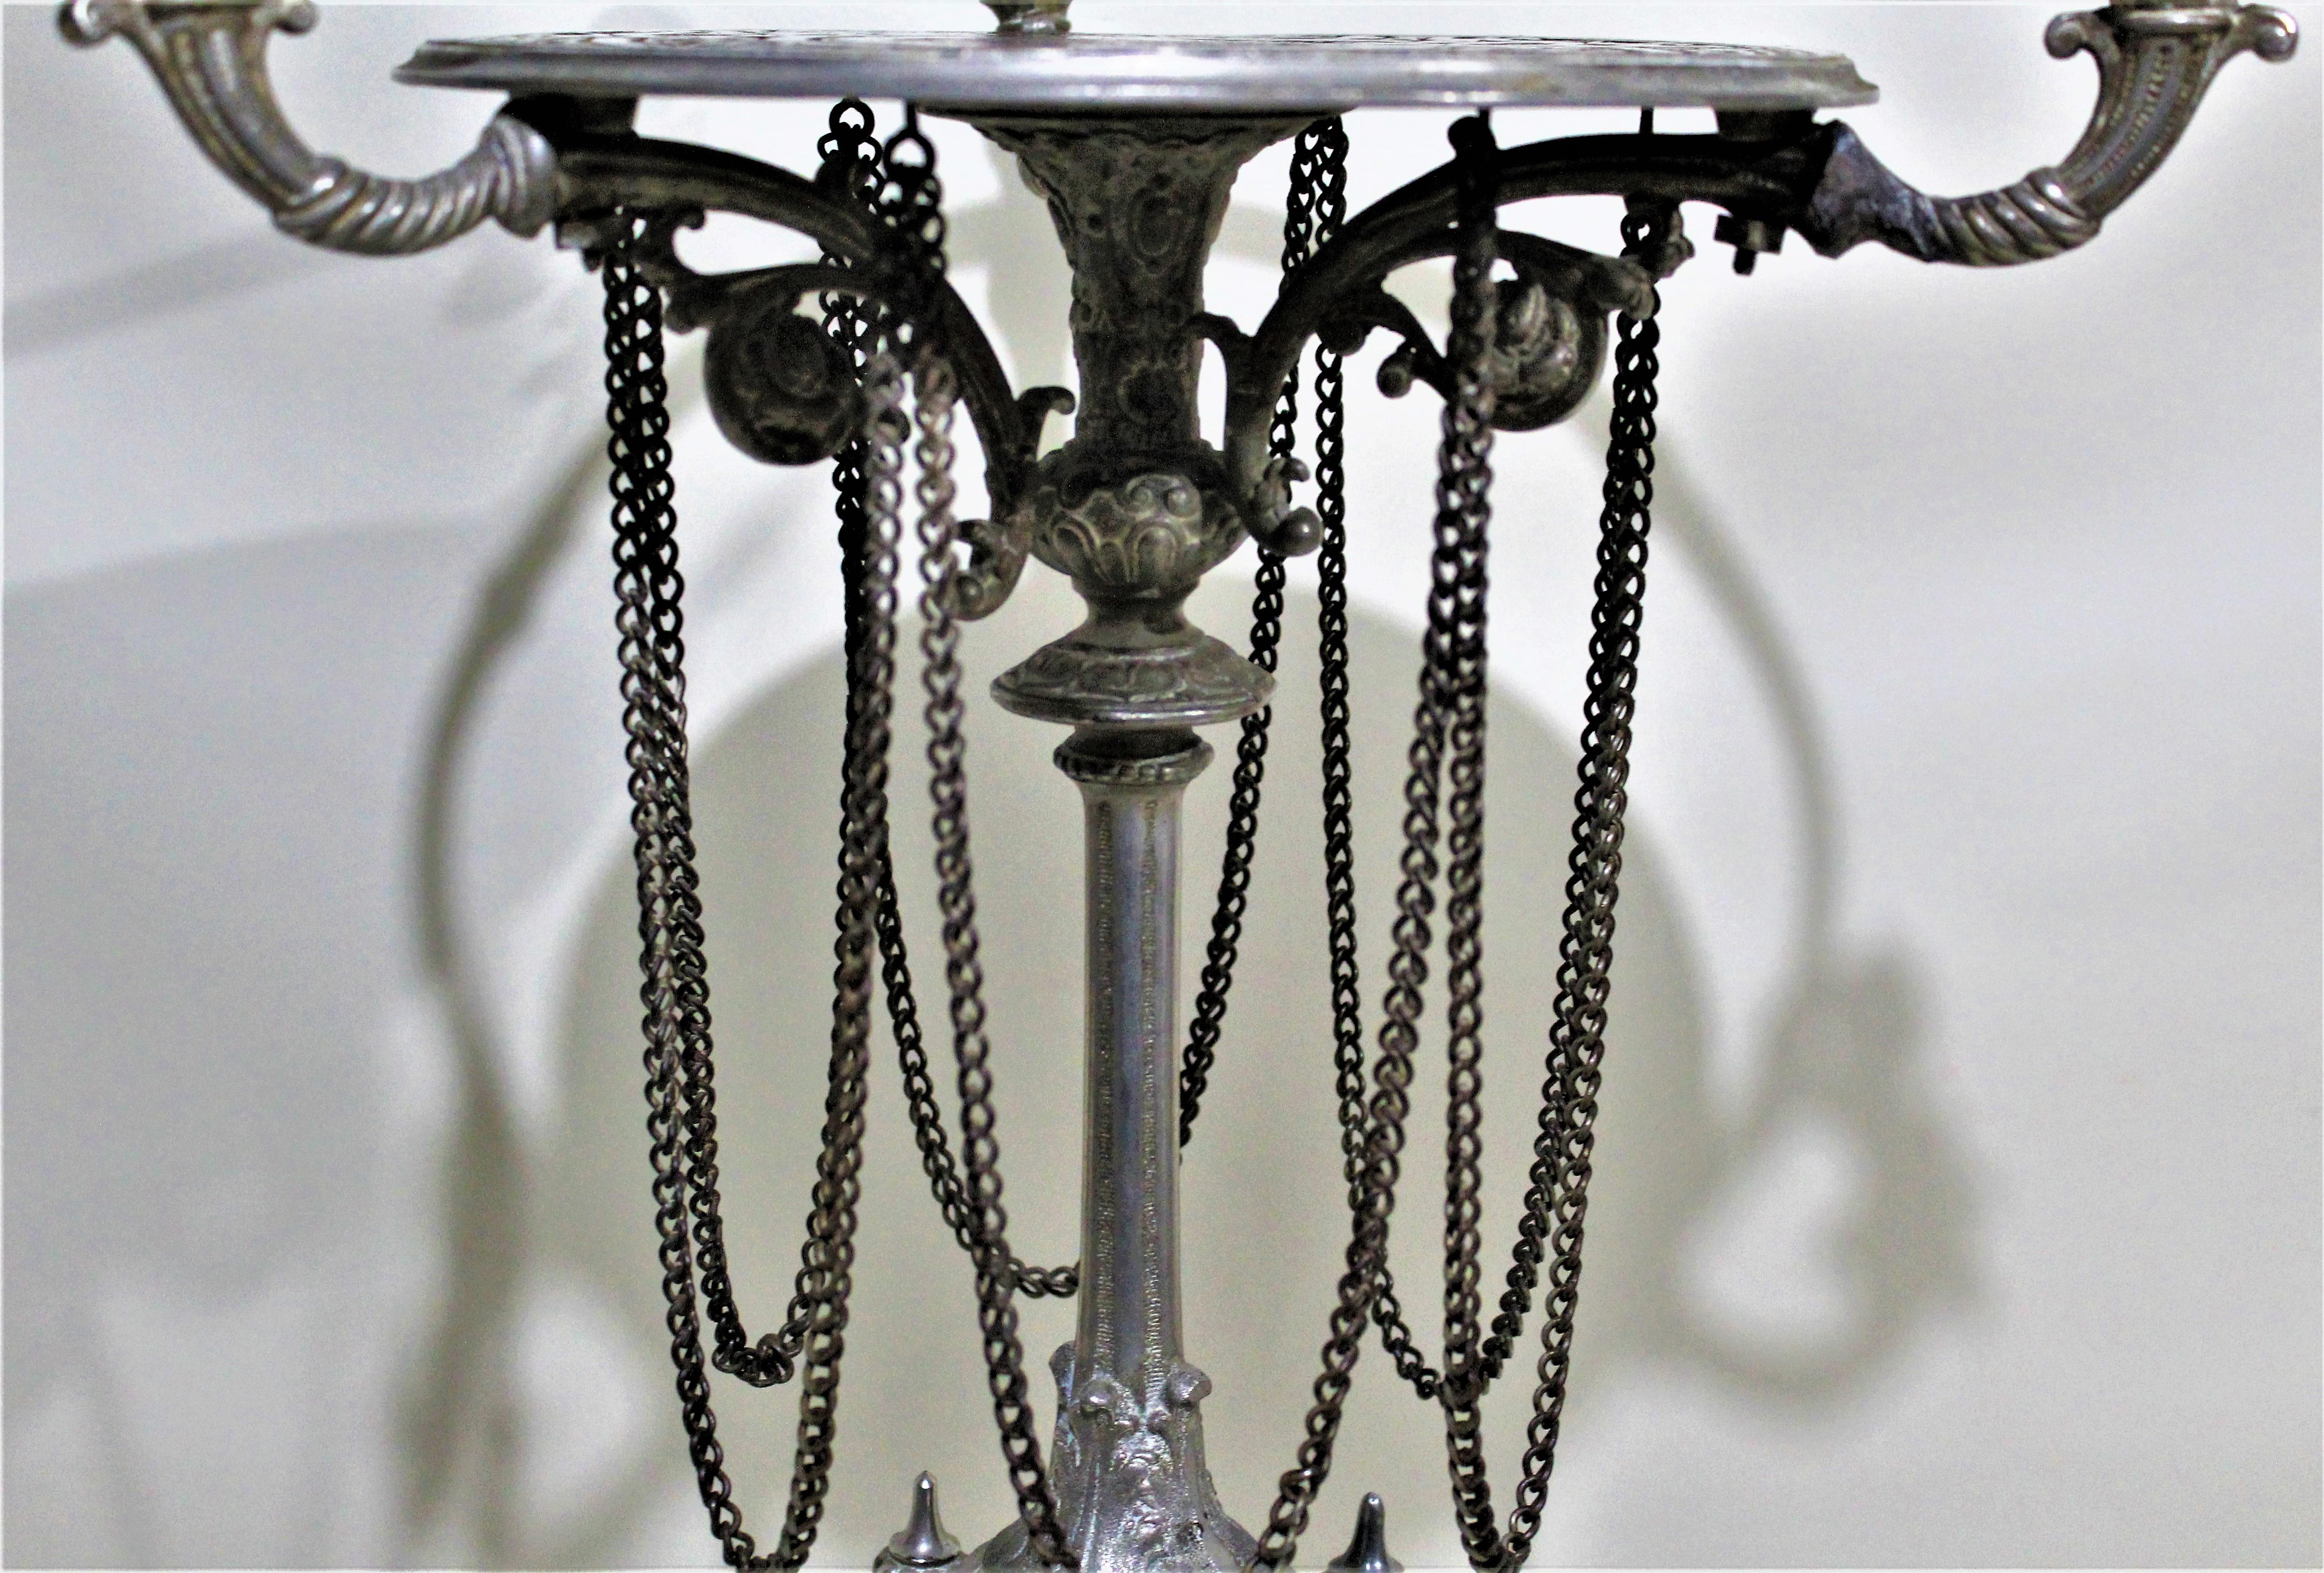 Antique Victorian Cast Metal Plated Pedestal Table Figural Accents Engraved Top 5